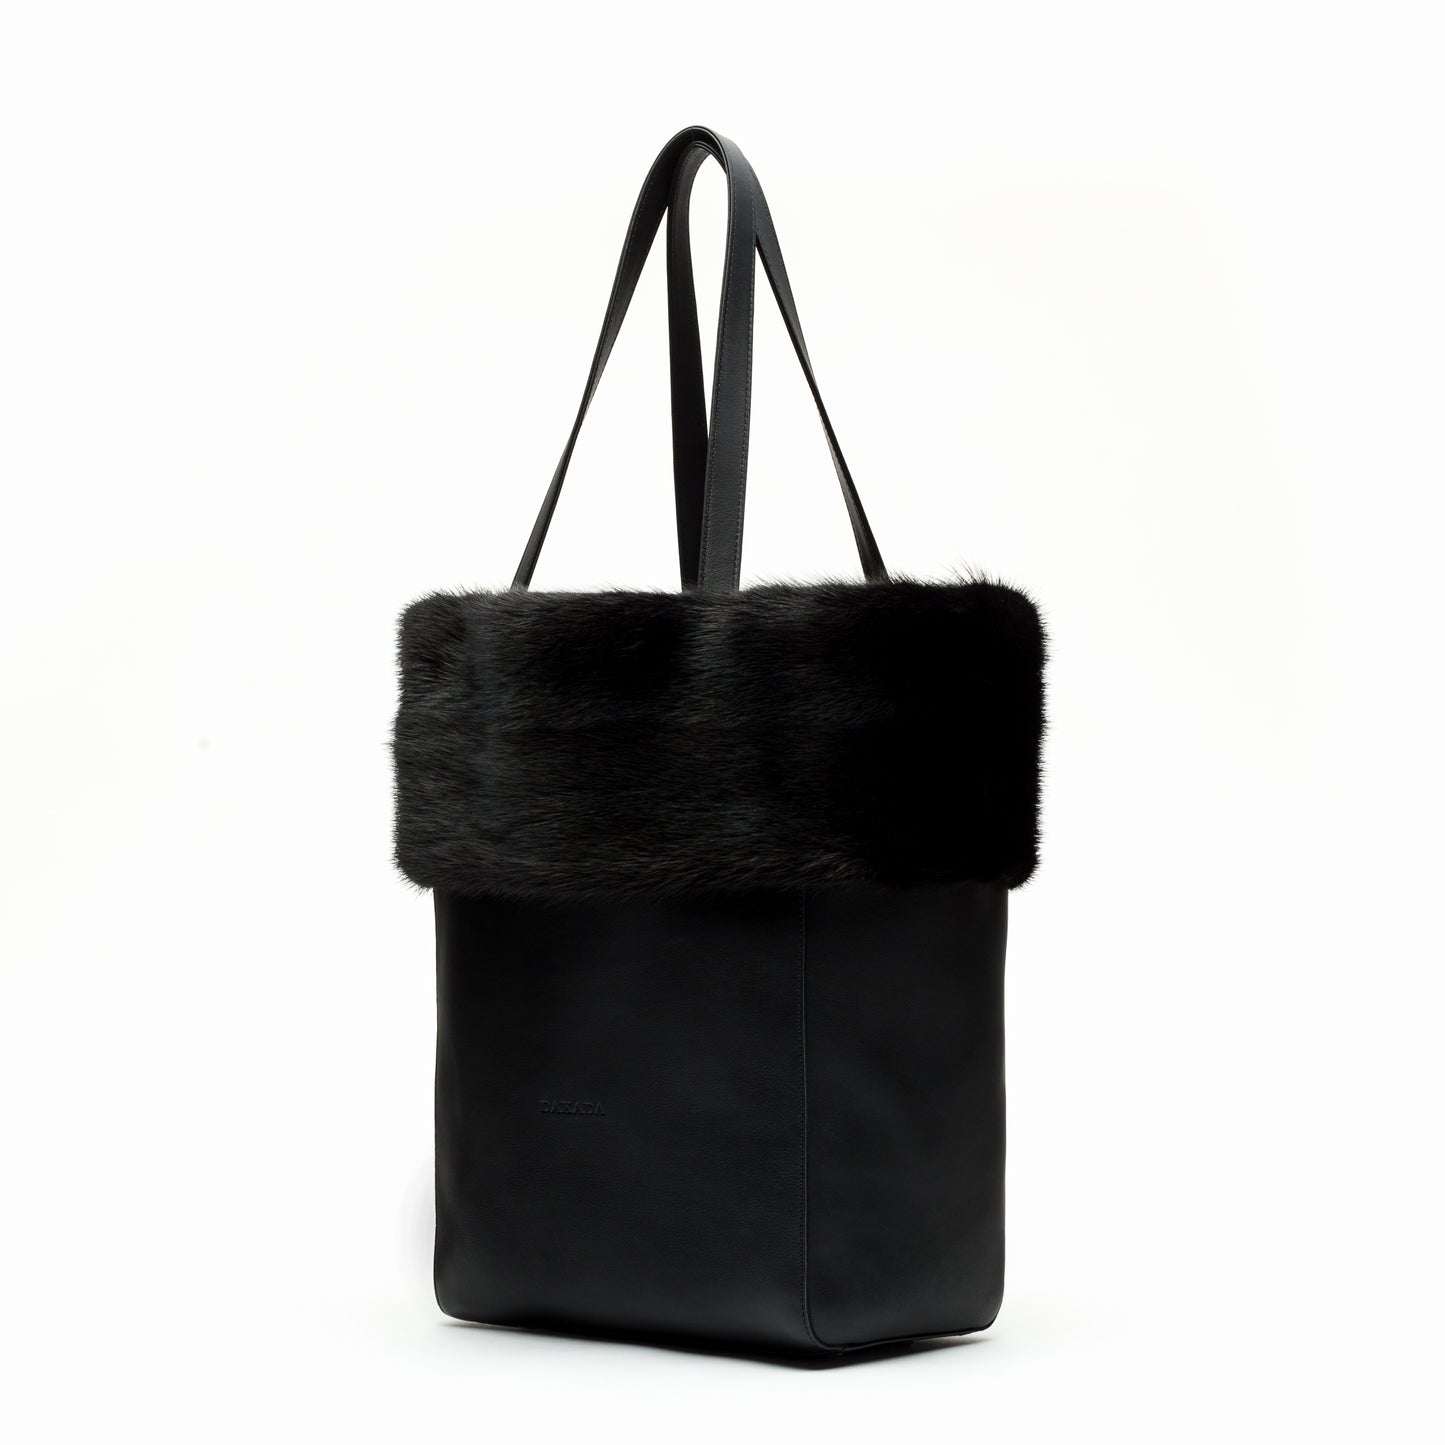 Kaley- Black Leather Tote with Ranch Mink